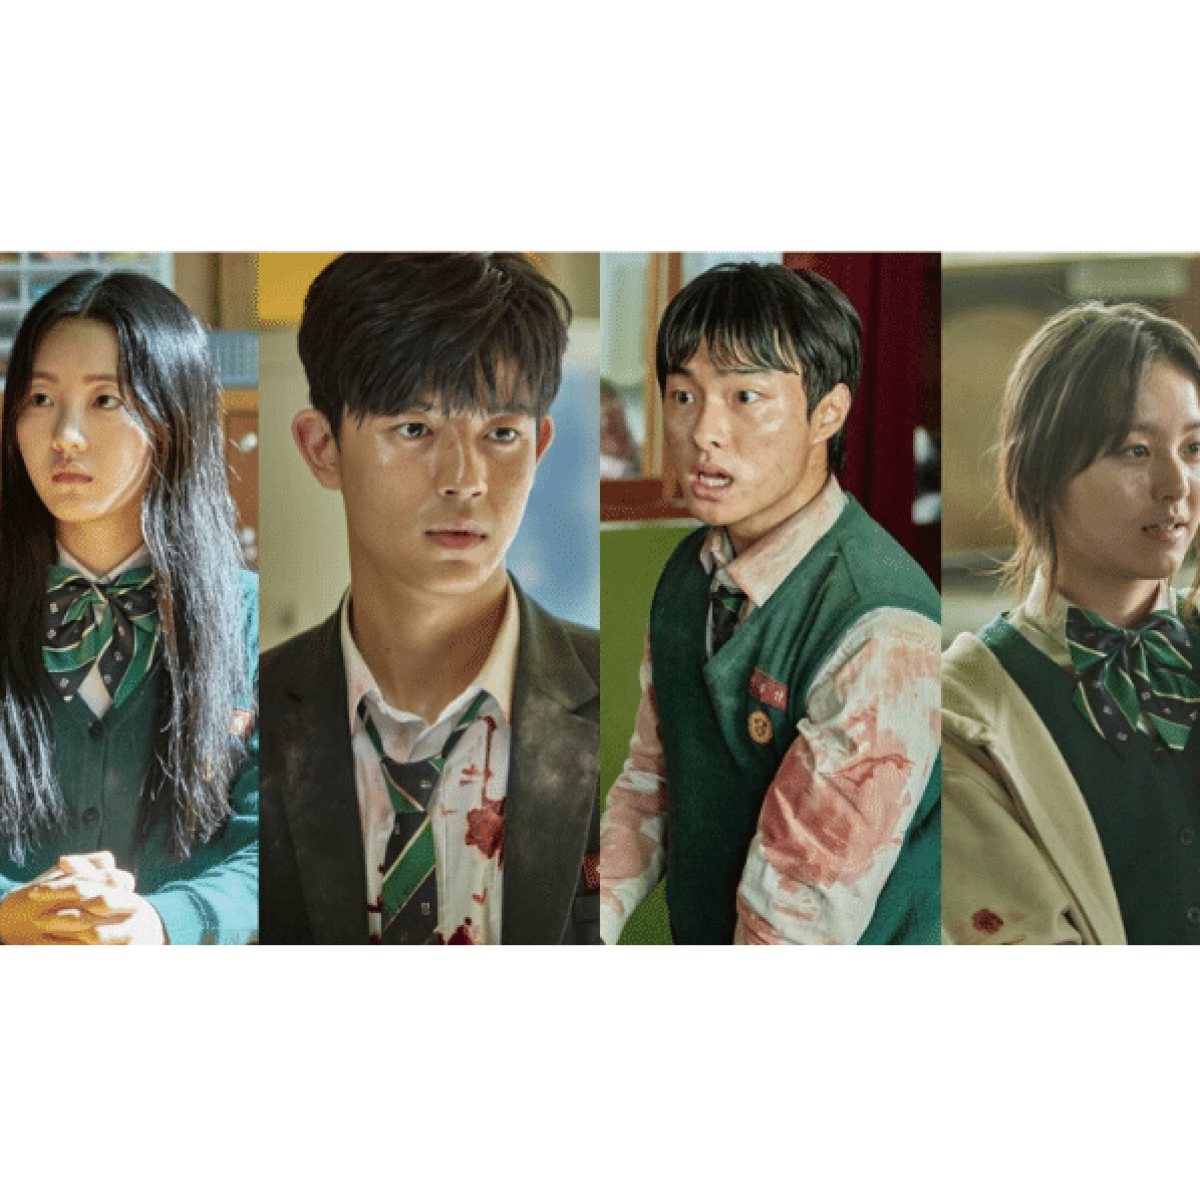 LOOK: Filipina among cast of Korean zombie series 'All Of Us Are Dead' -  The Filipino Times